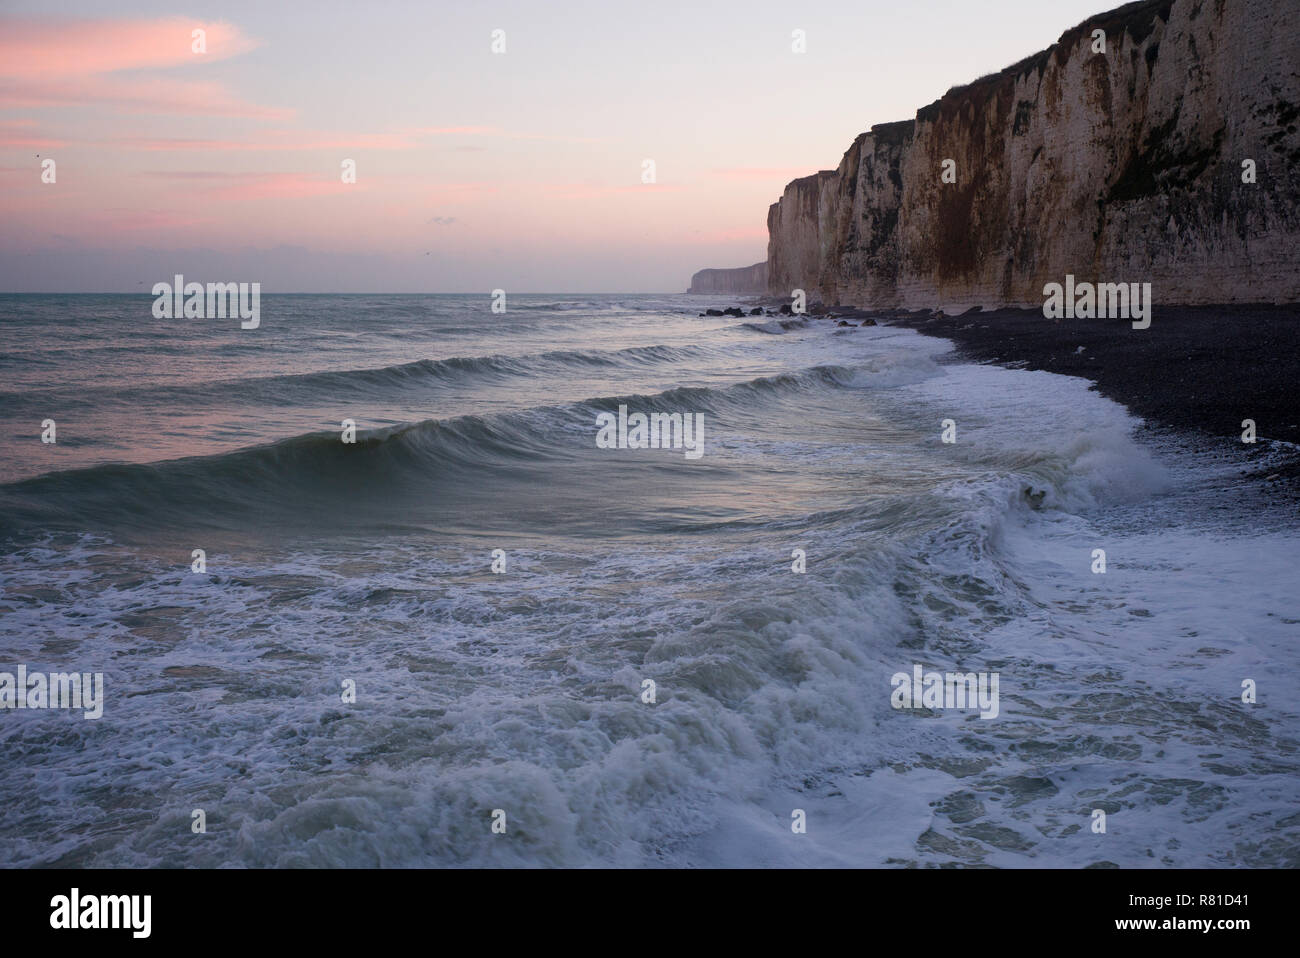 Waves on beach under cliffs, Normandy, France Stock Photo